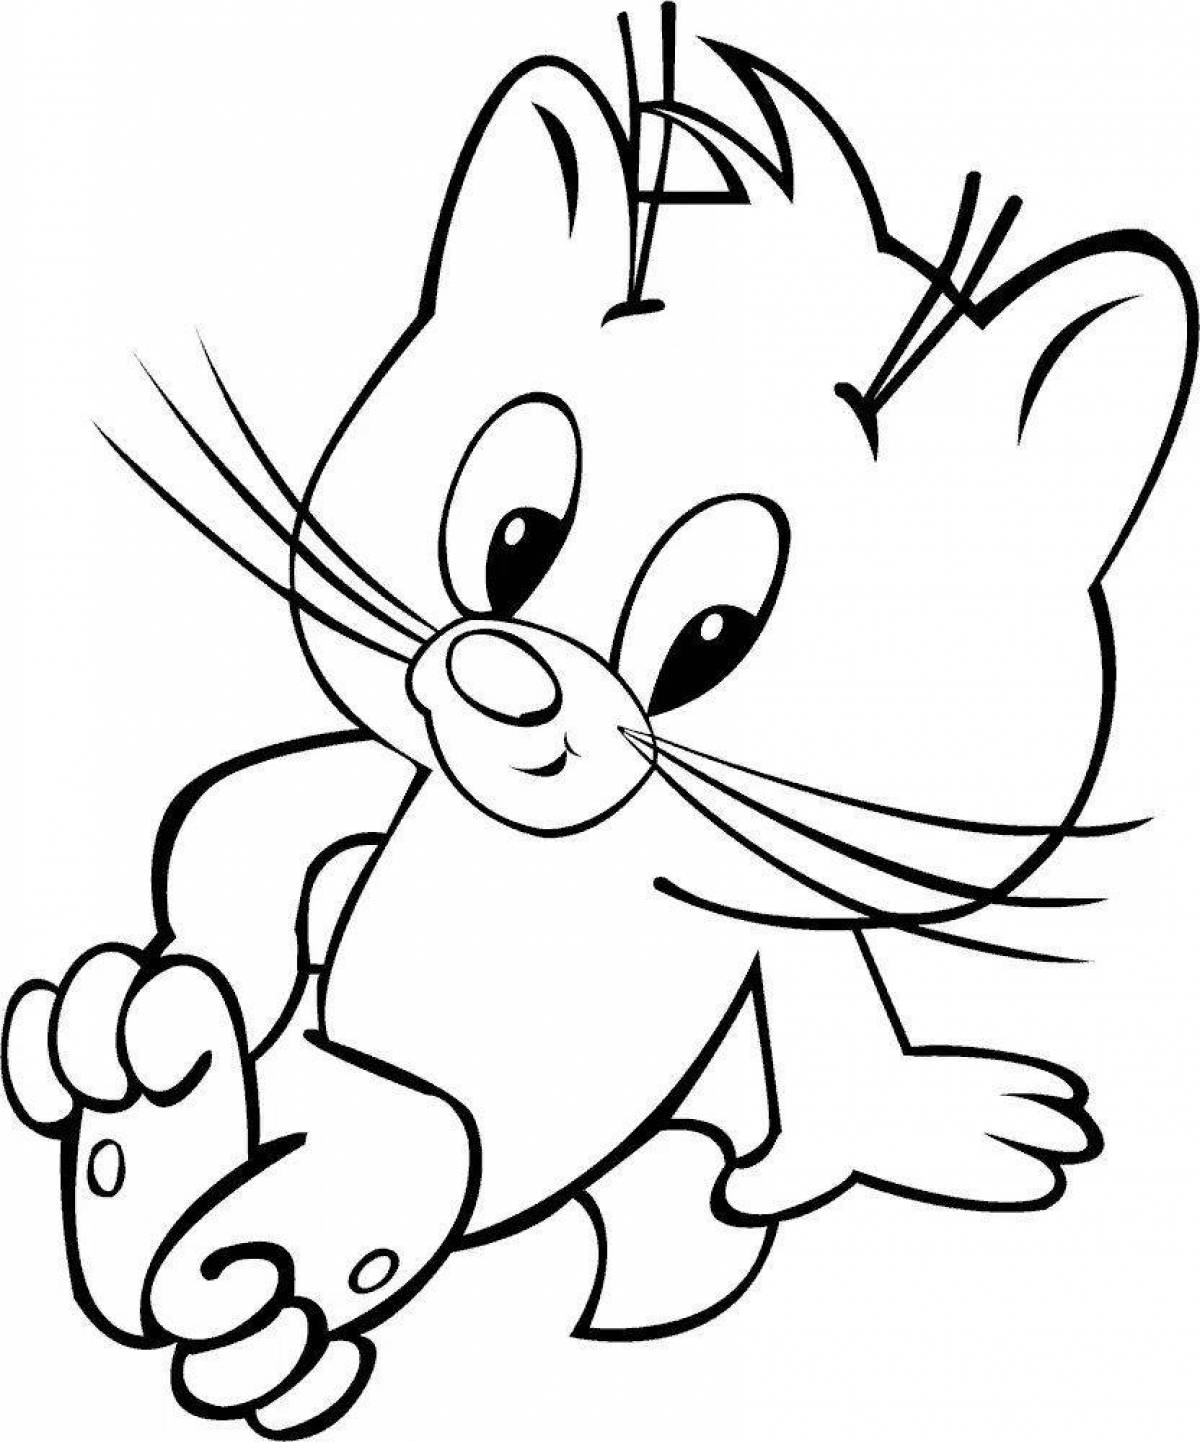 Playful photo coloring pages